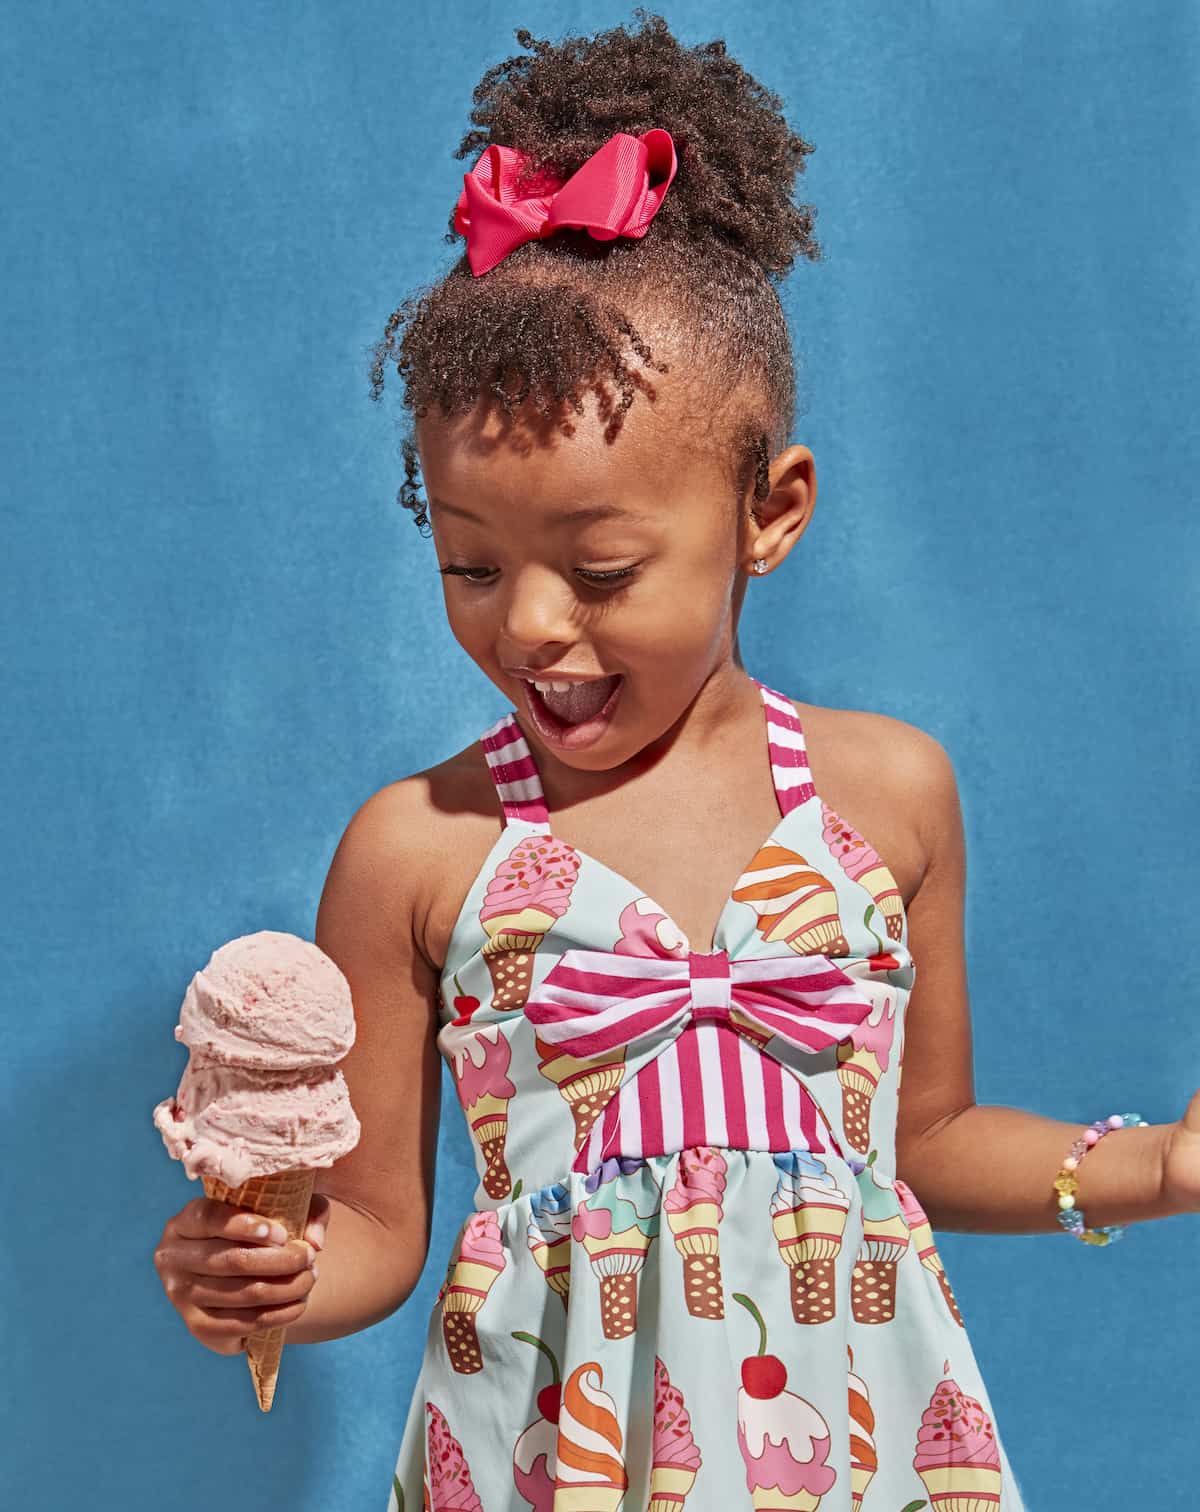 Little girl holding a strawberry ice cream cone.